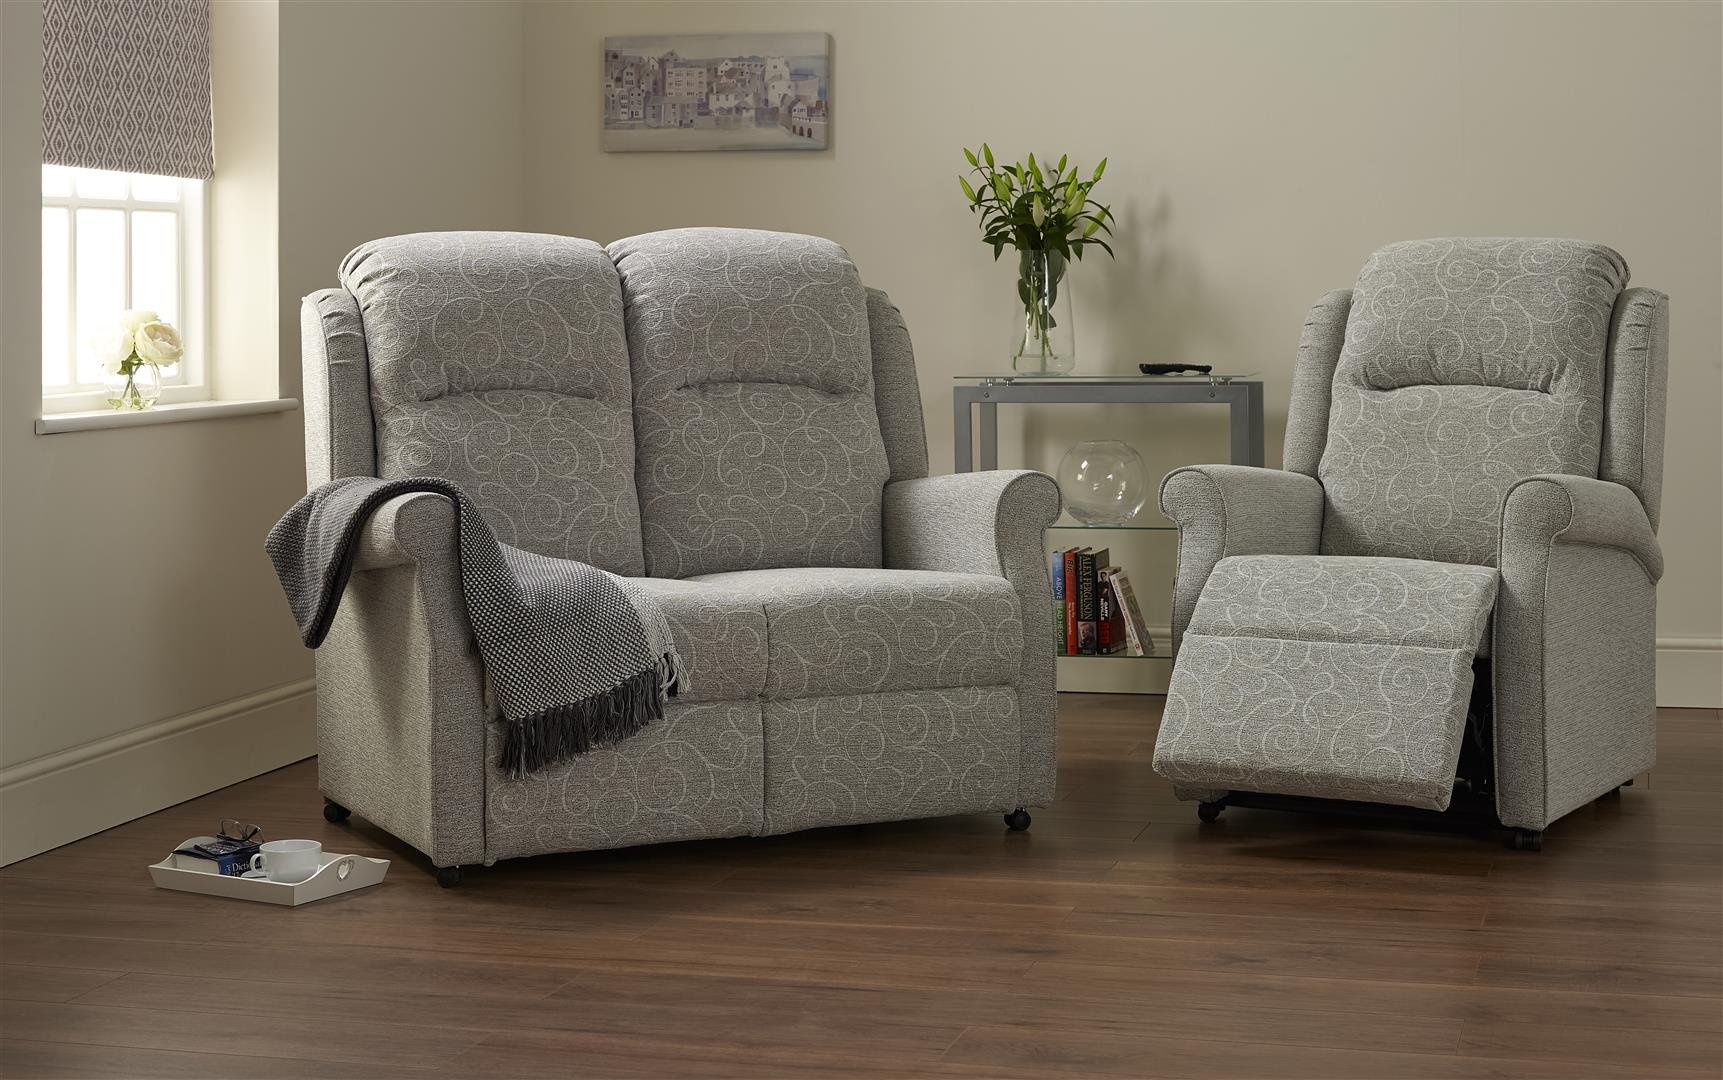 What Should You Look For In a Recliner Chair? | Derbyshire Mobility